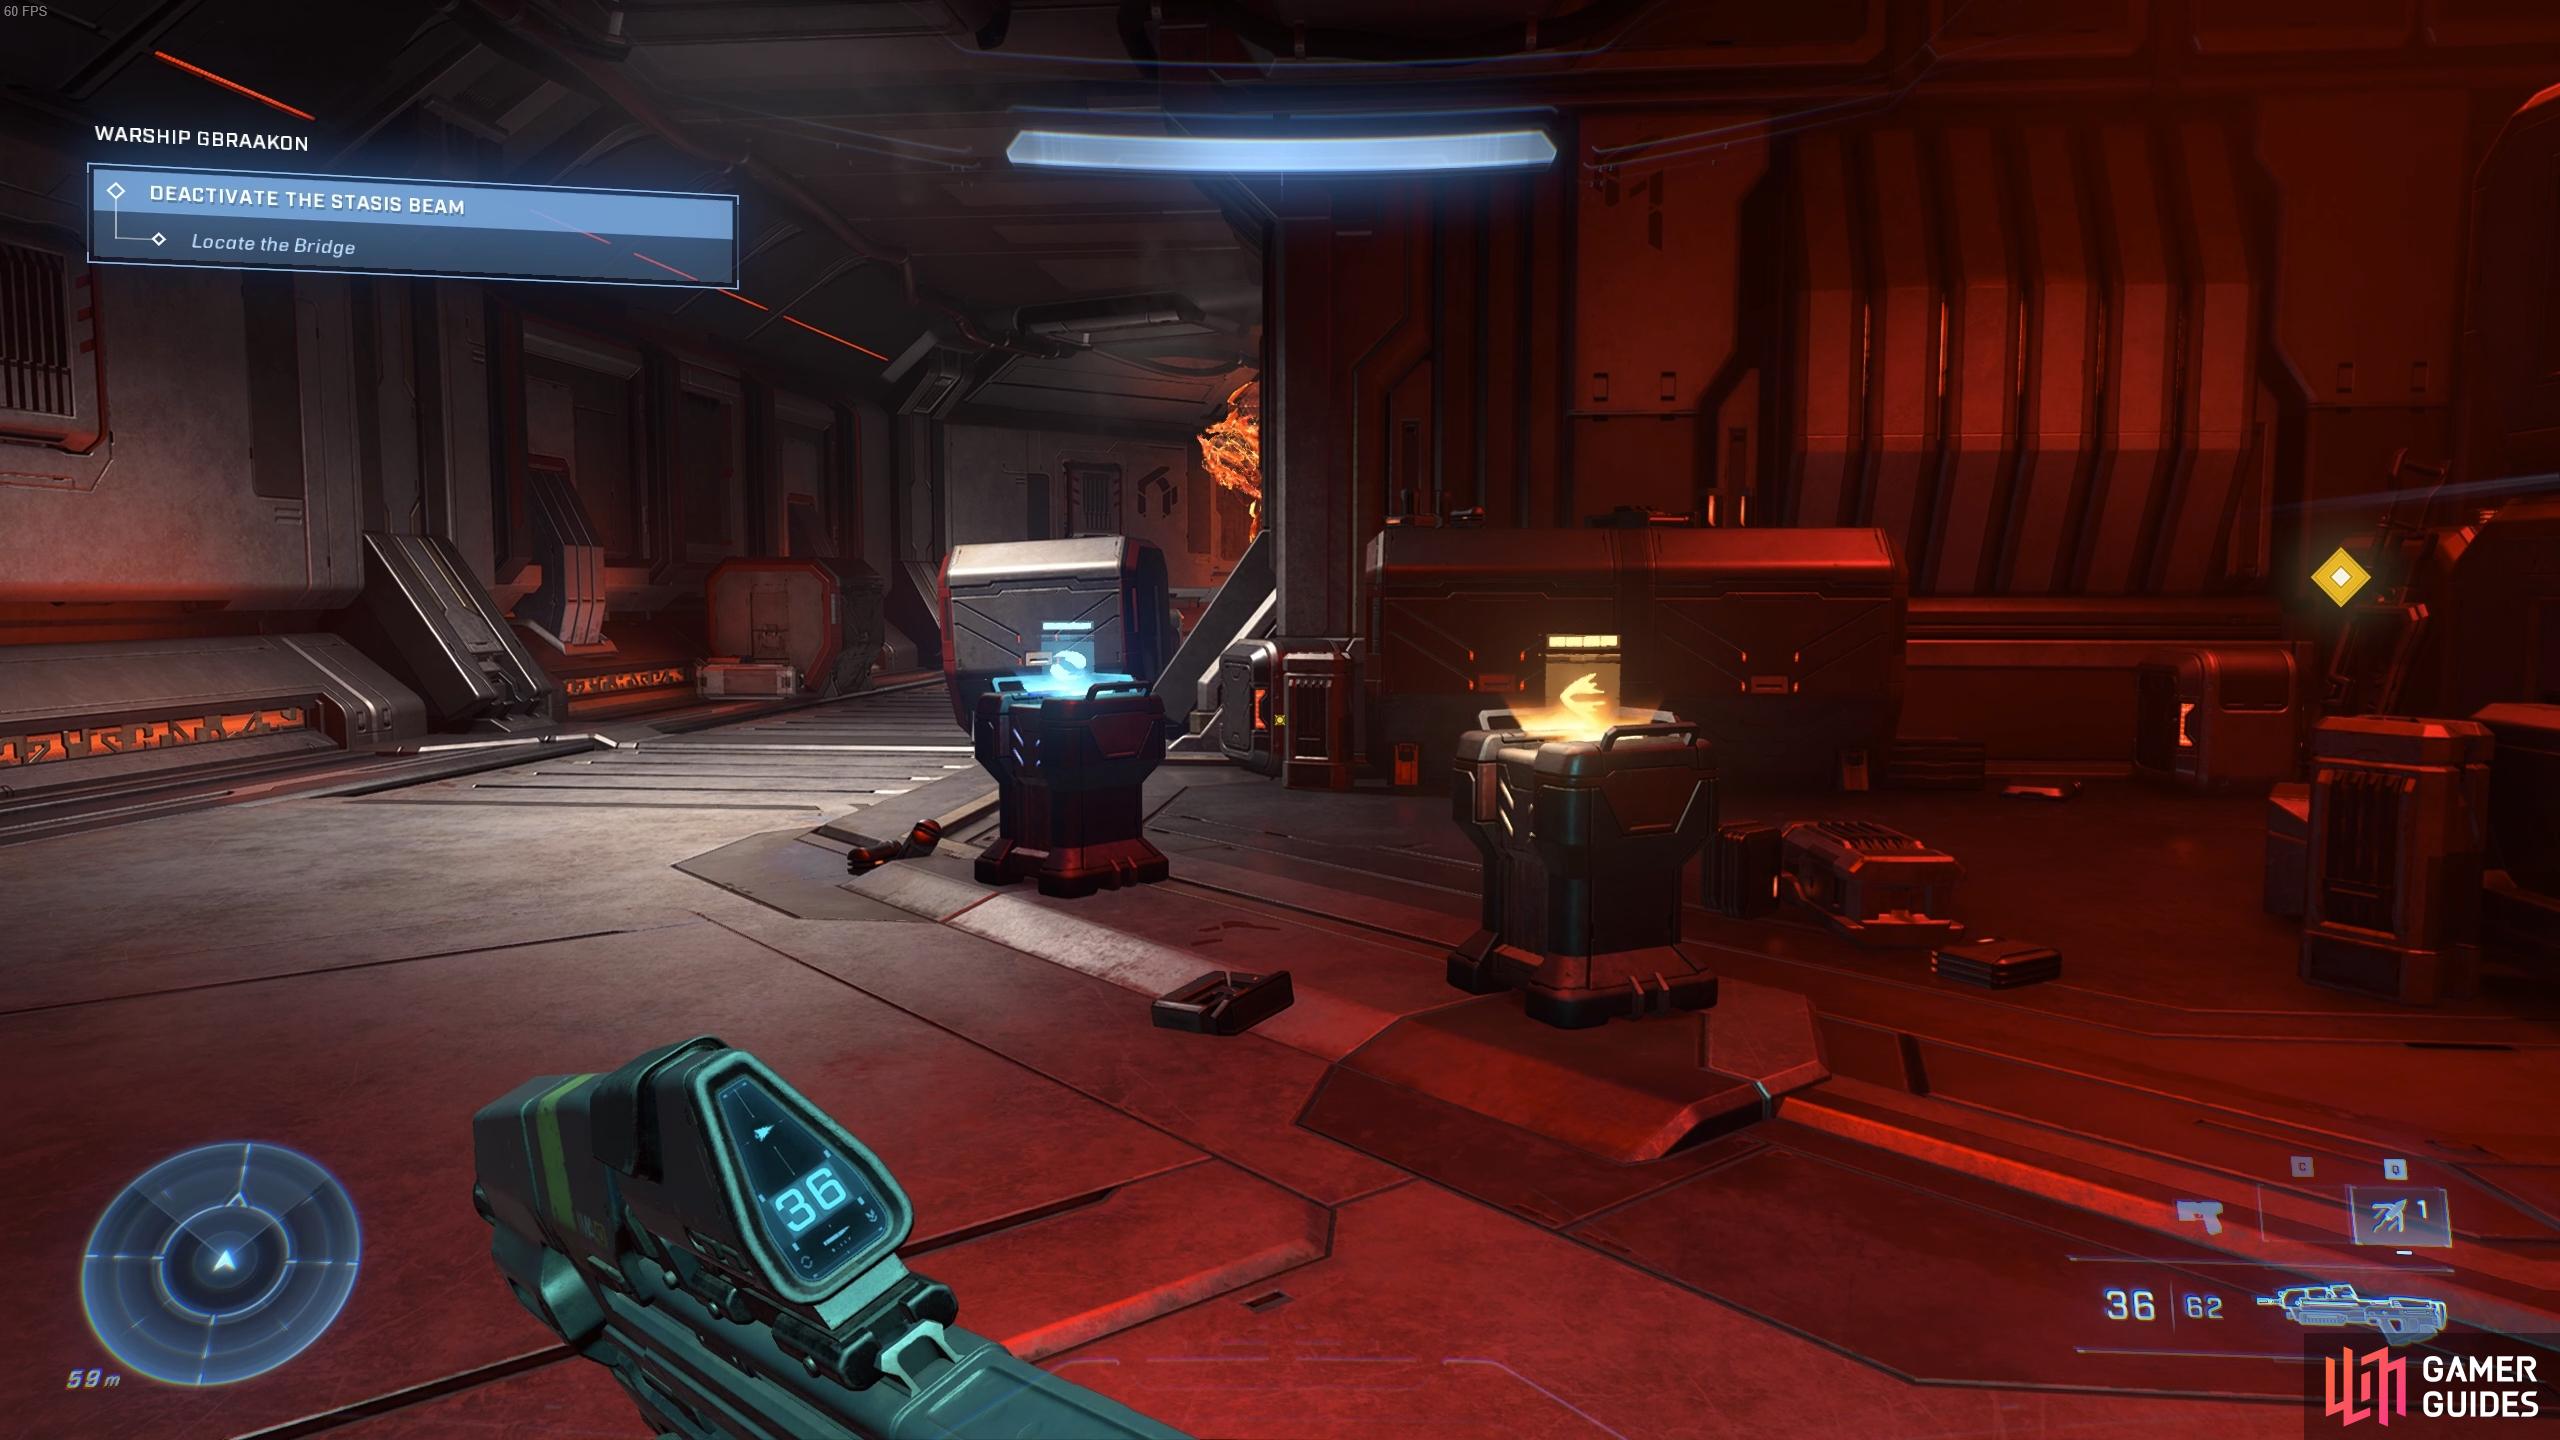 You'll find ammo crates to replenish ammunition as you move through the ship.